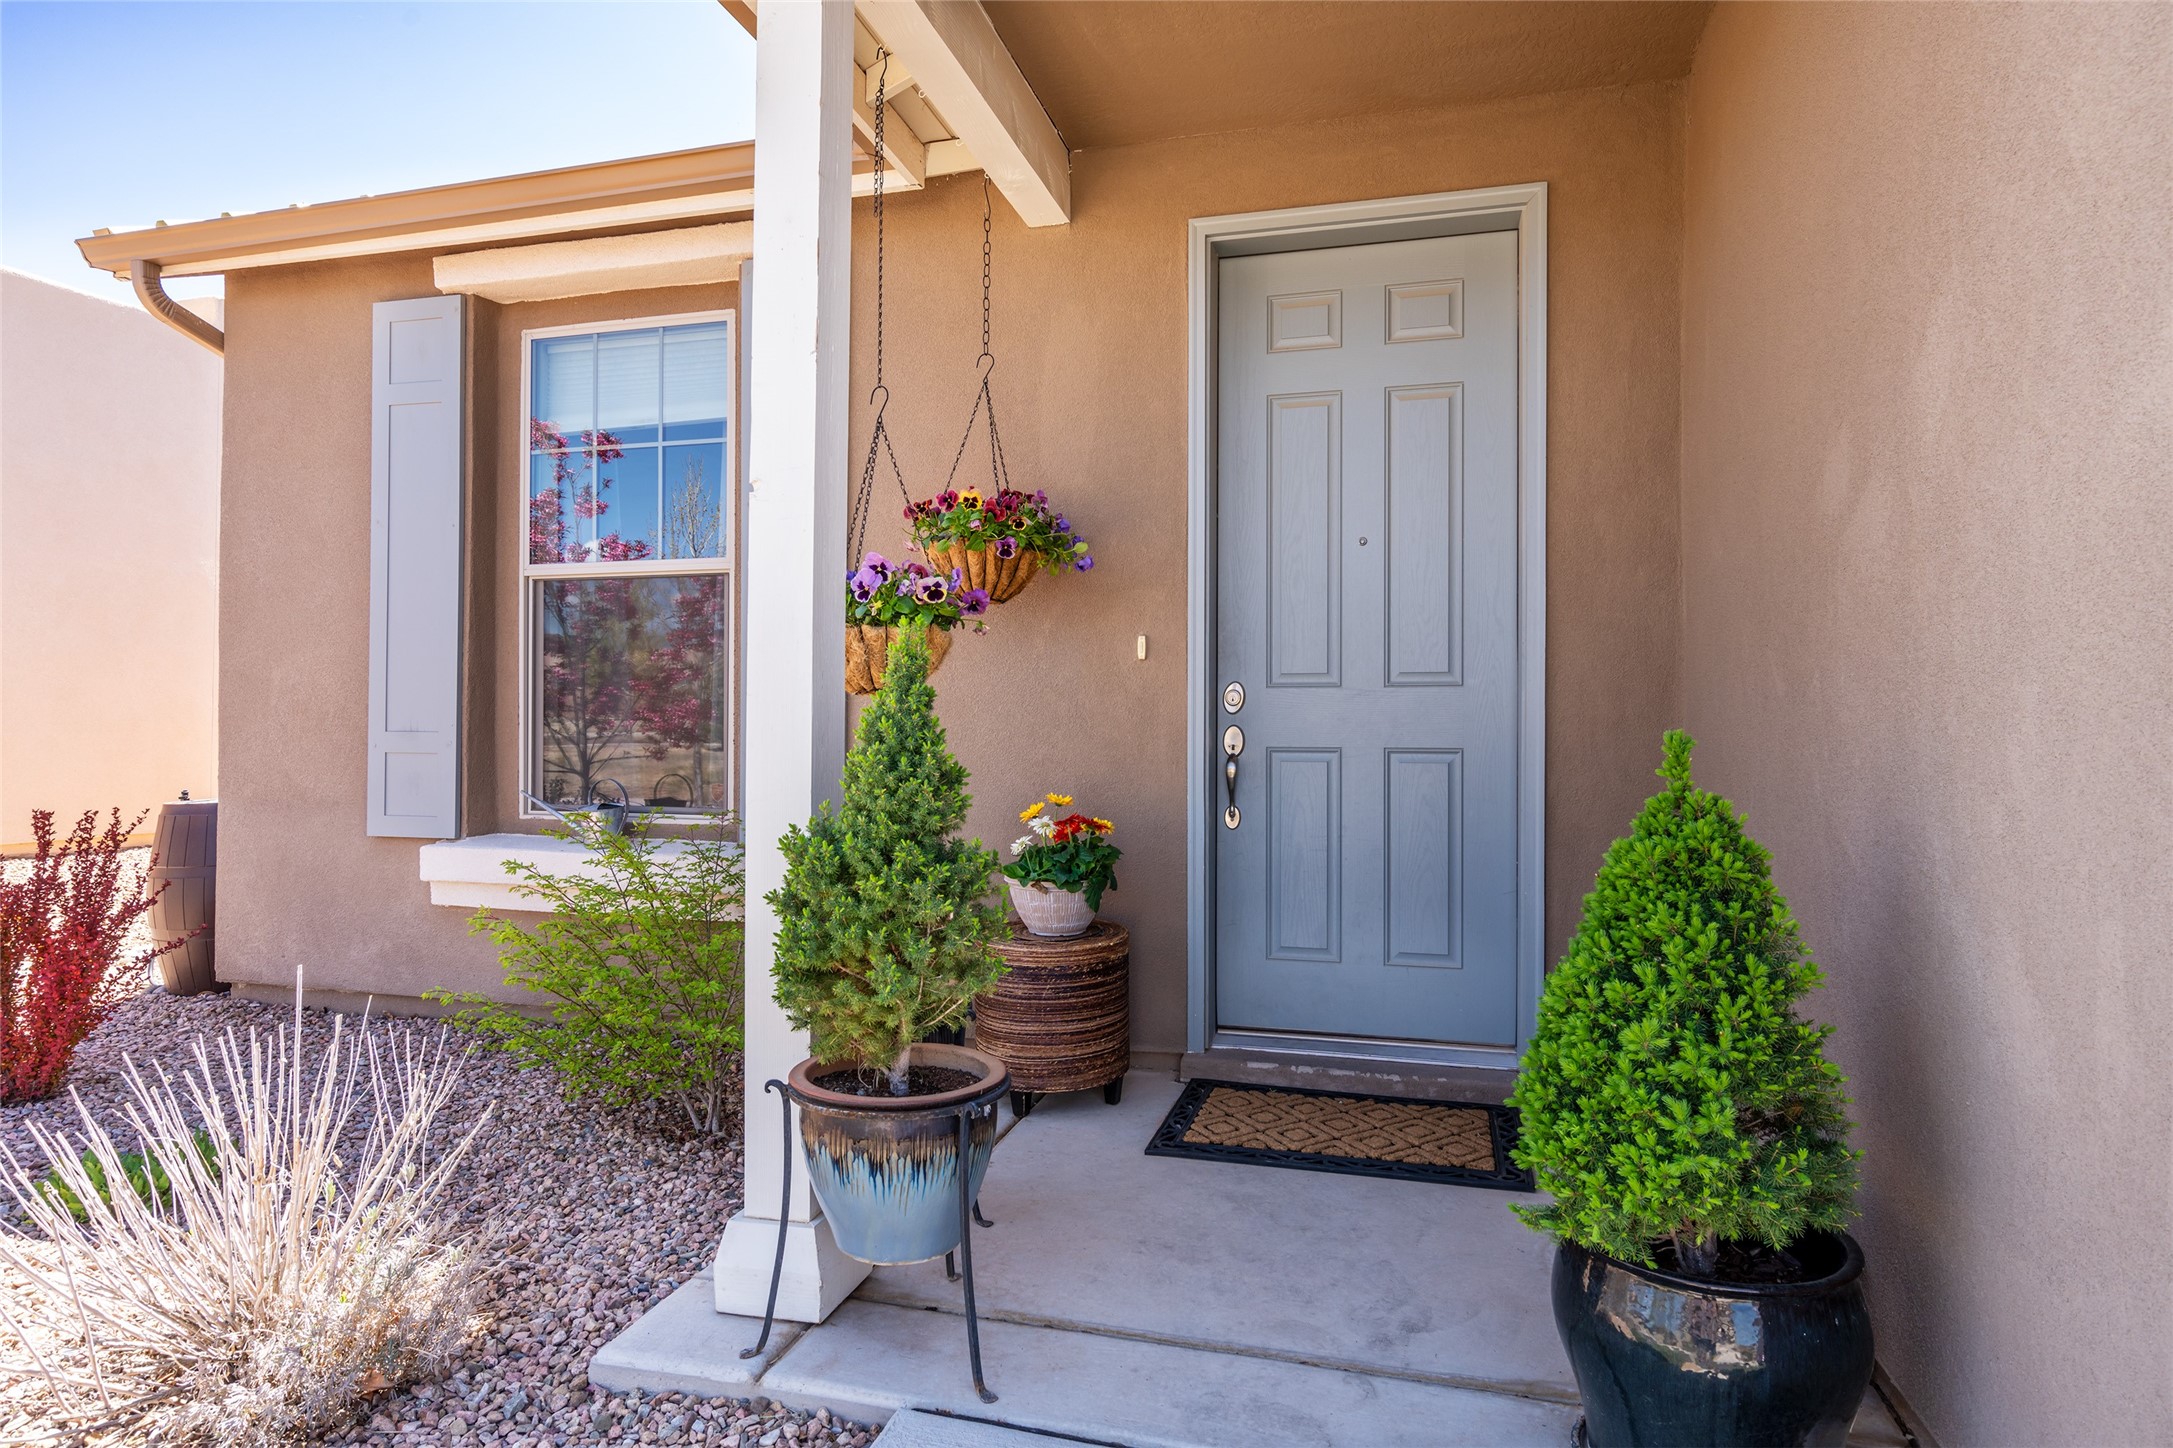 44 Calle Ancla, Santa Fe, New Mexico 87508, 3 Bedrooms Bedrooms, ,2 BathroomsBathrooms,Residential,For Sale,44 Calle Ancla,202401523